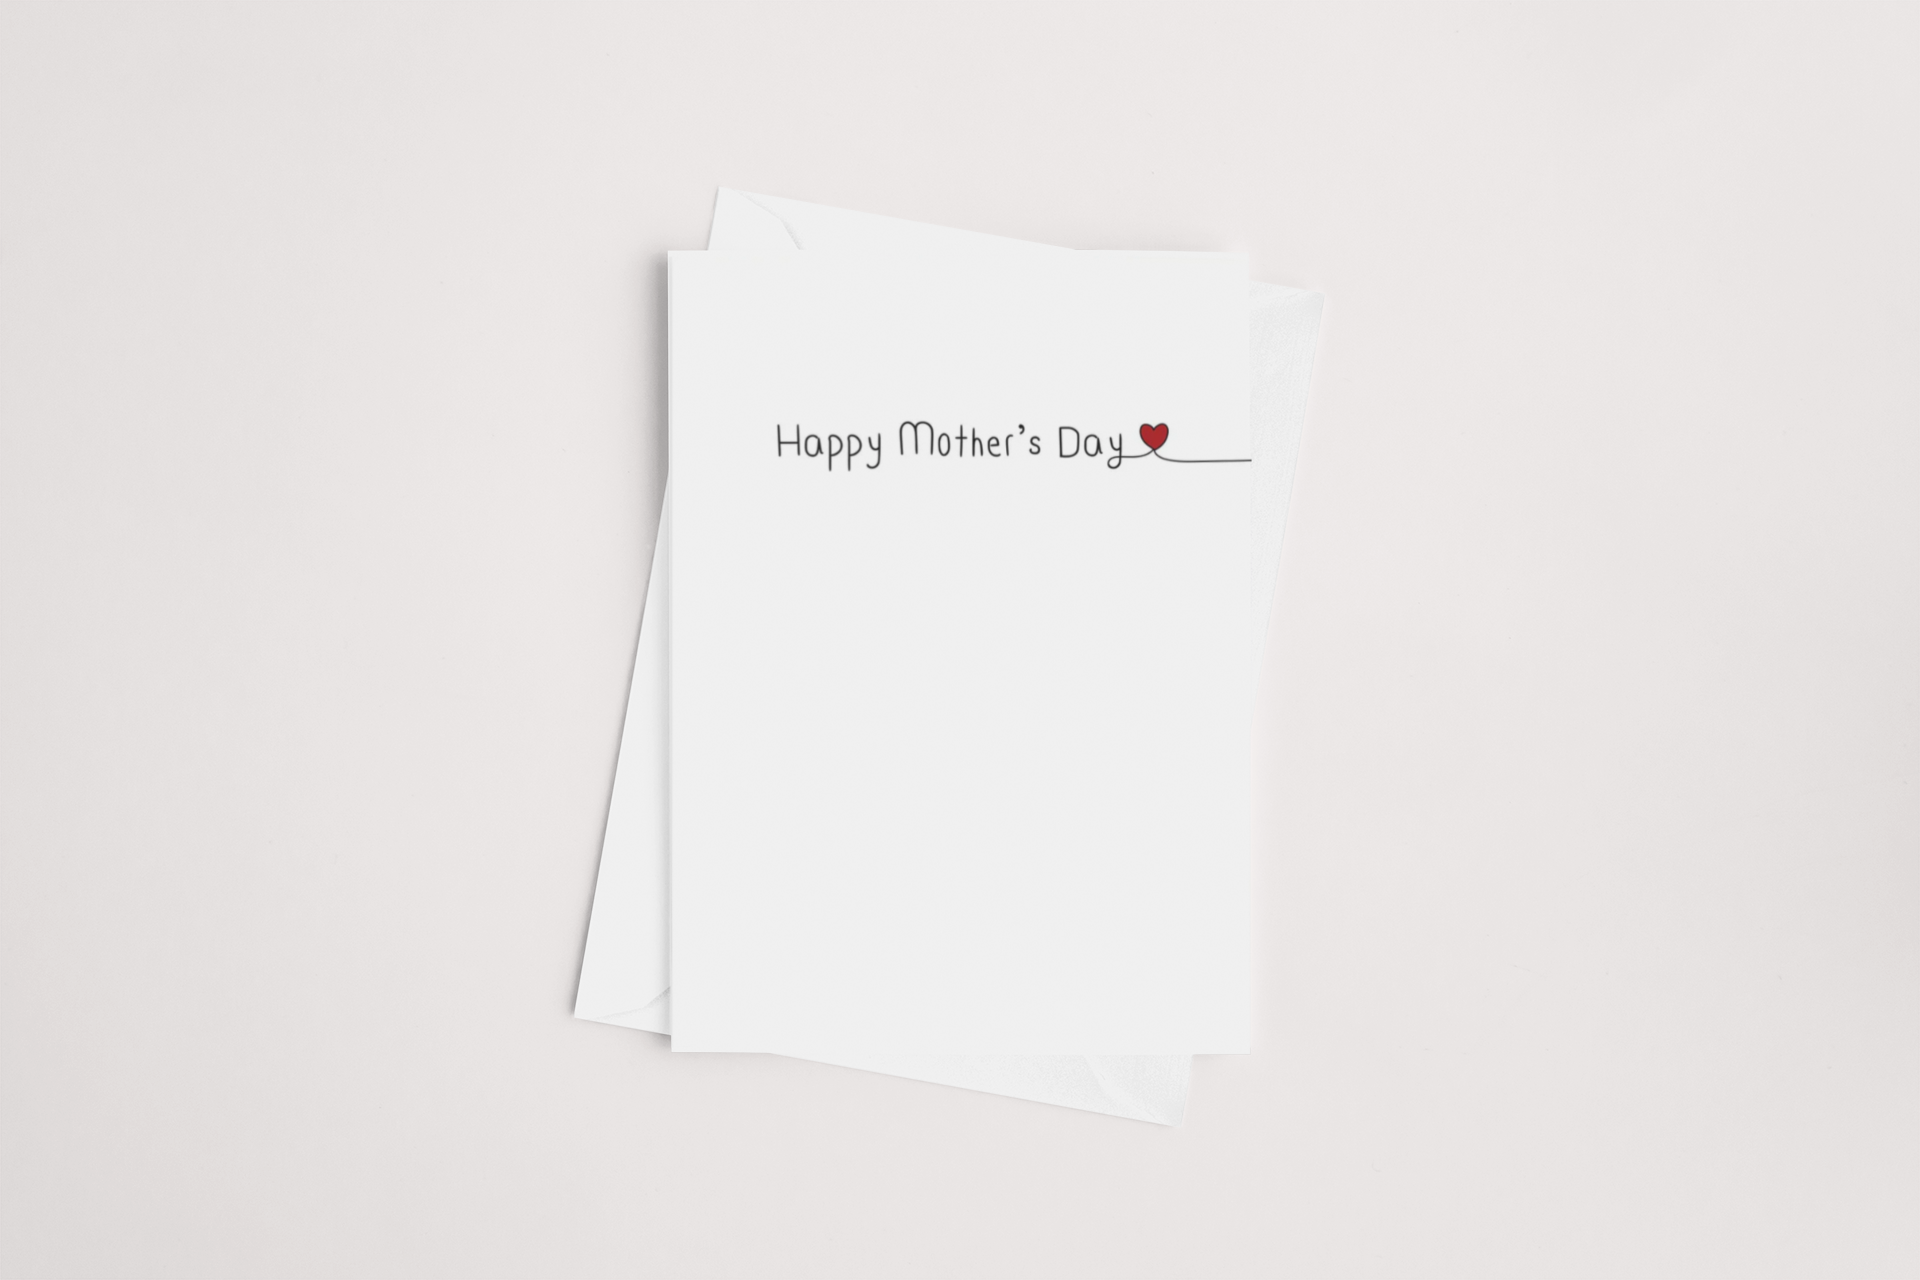 A simple white icandy Happy Mother's Day Card with "happy mother's day" written in black ink on the front, positioned on a white background.